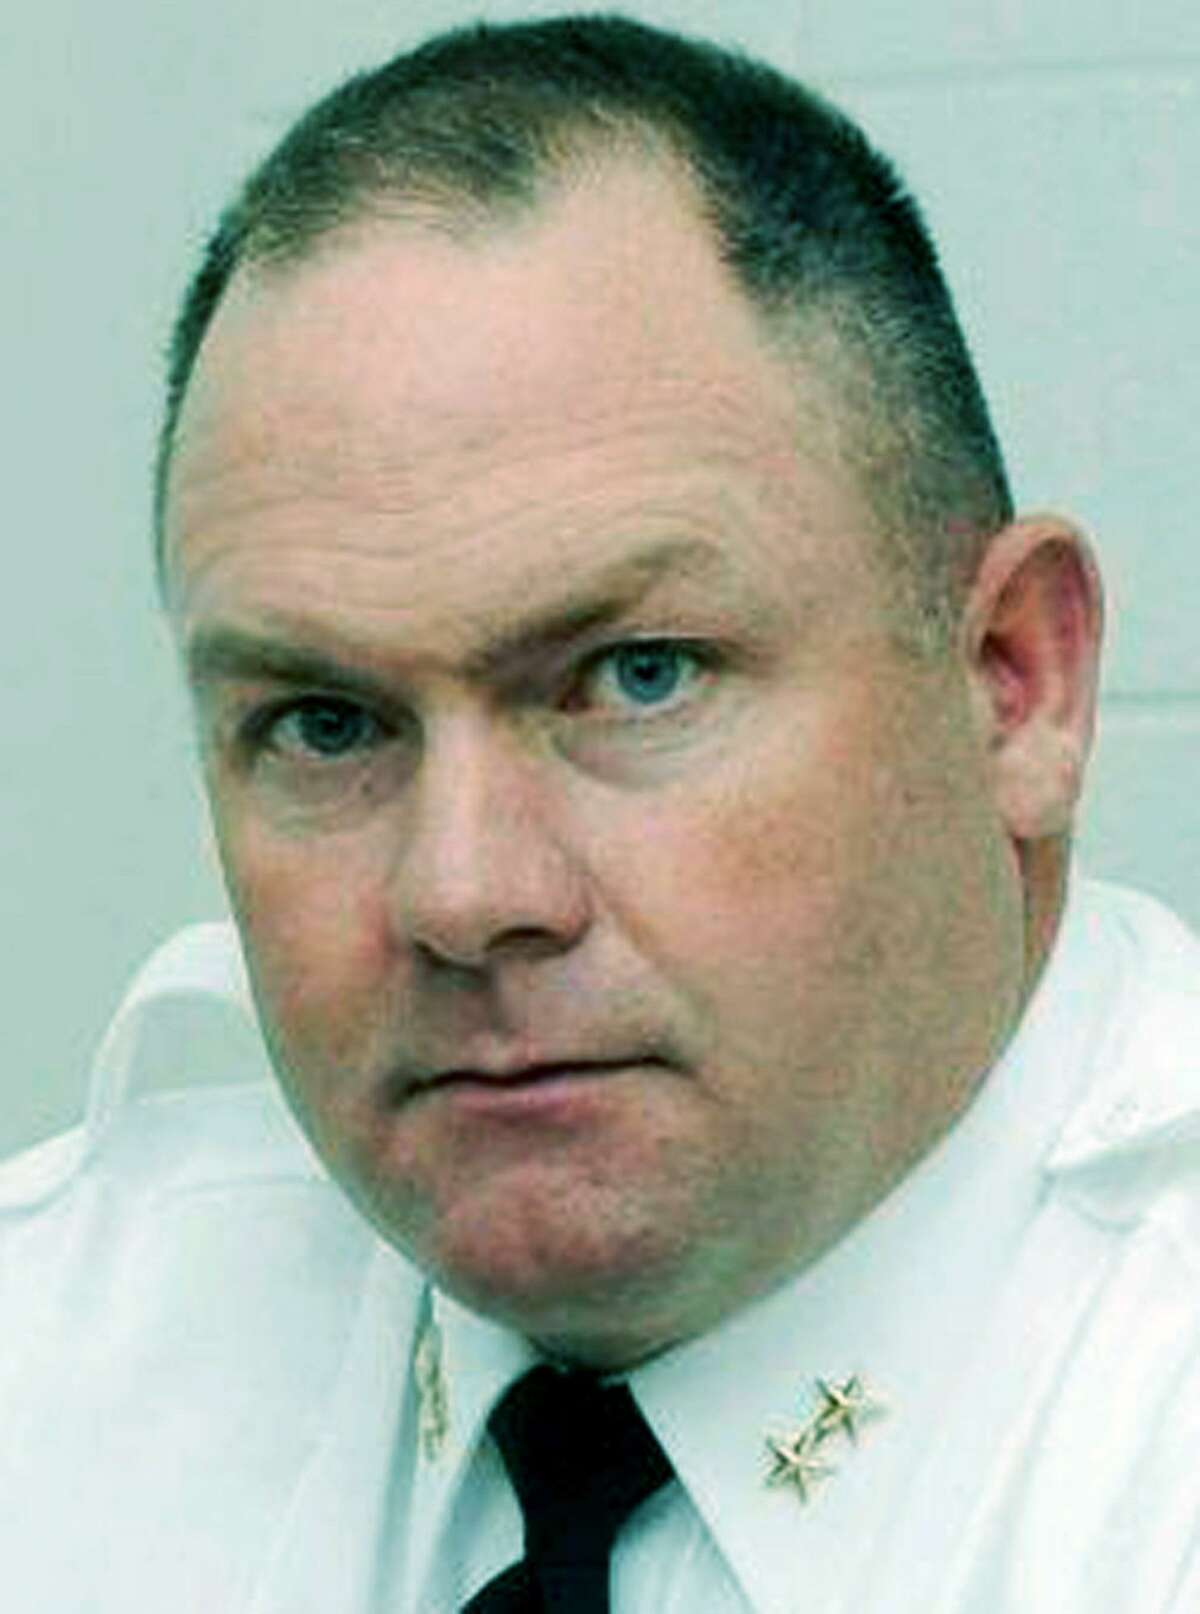 Chief Shawn Boyne of the New Milford Police Department was recently told that his contract will not be renewed.